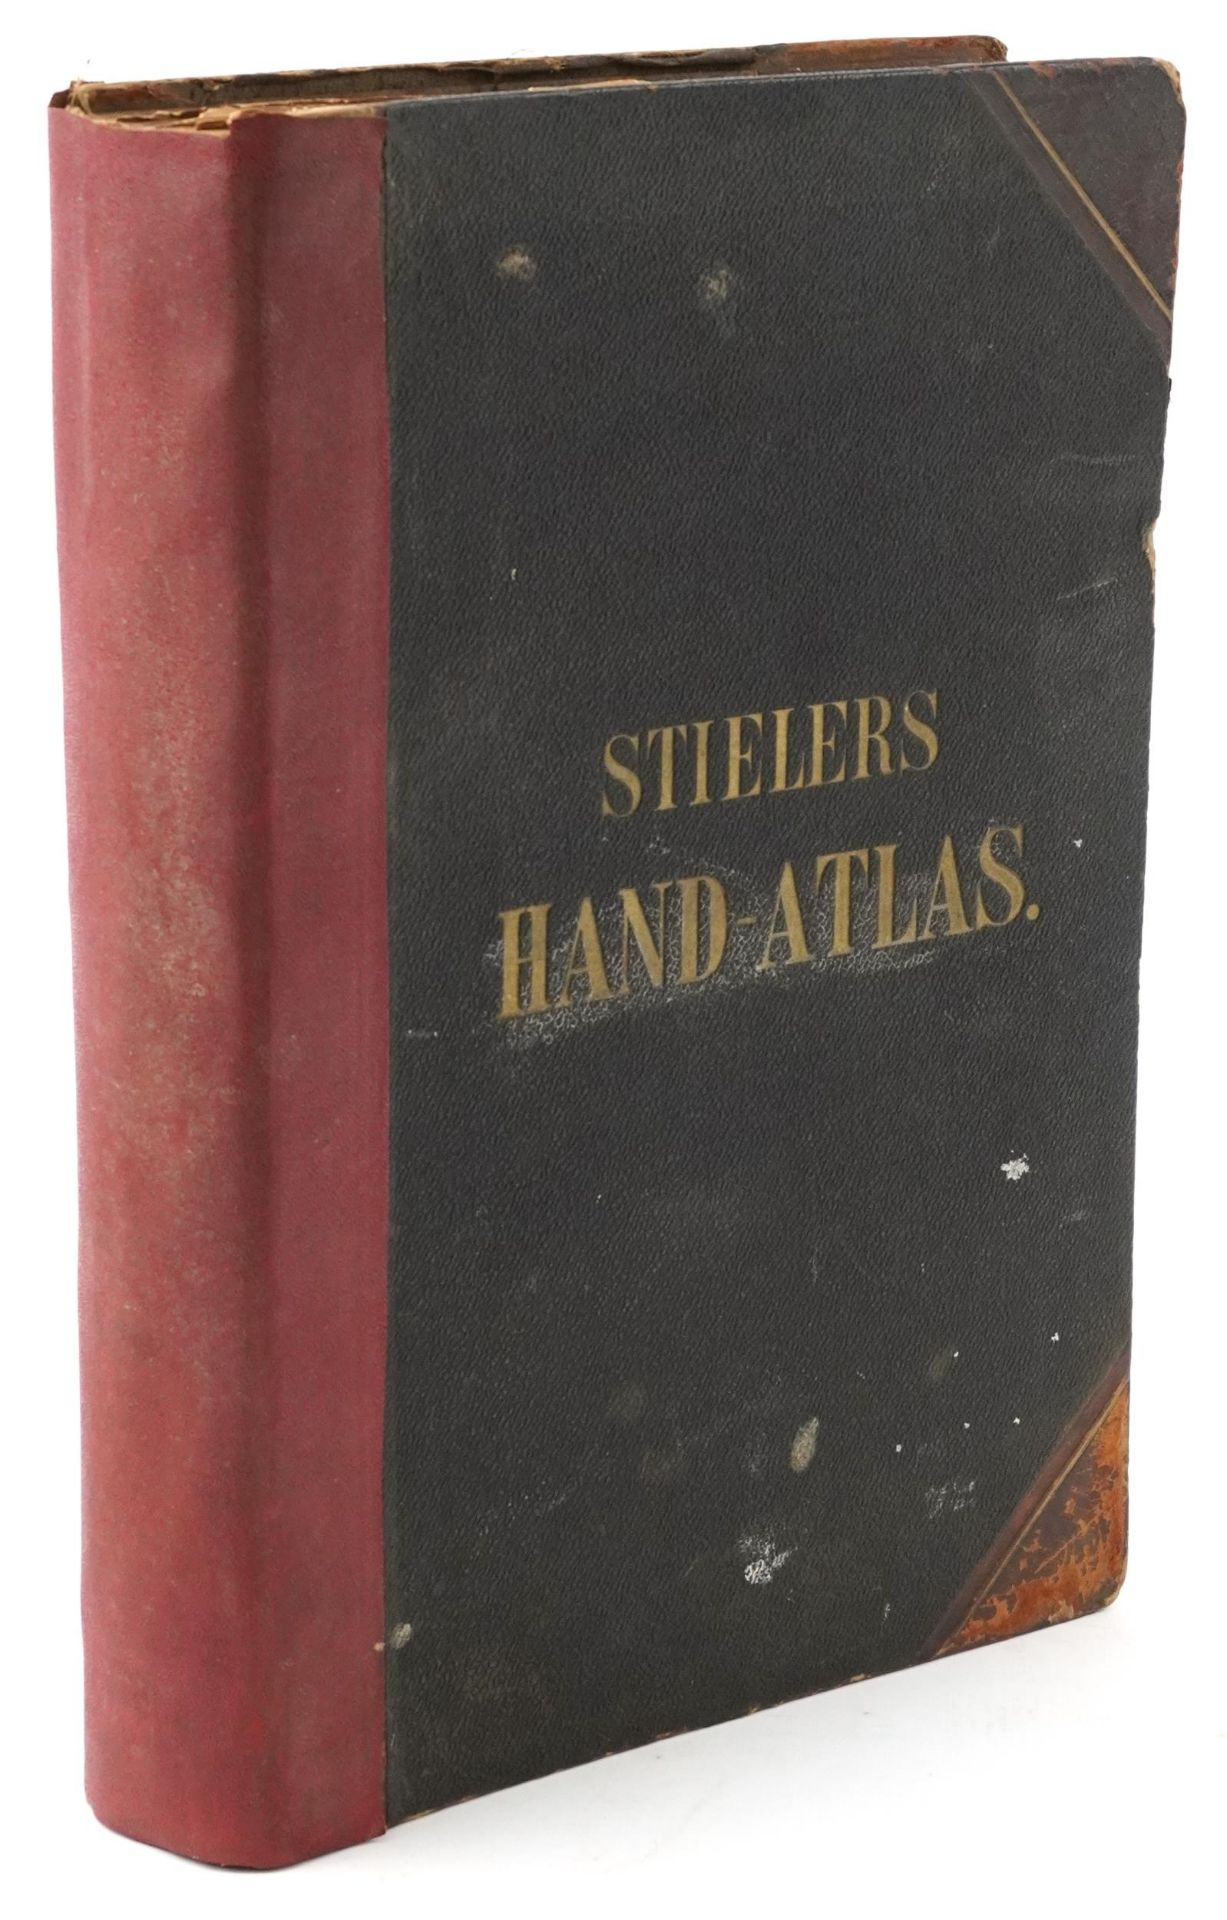 Adolf Stielers hand atlas with coloured maps